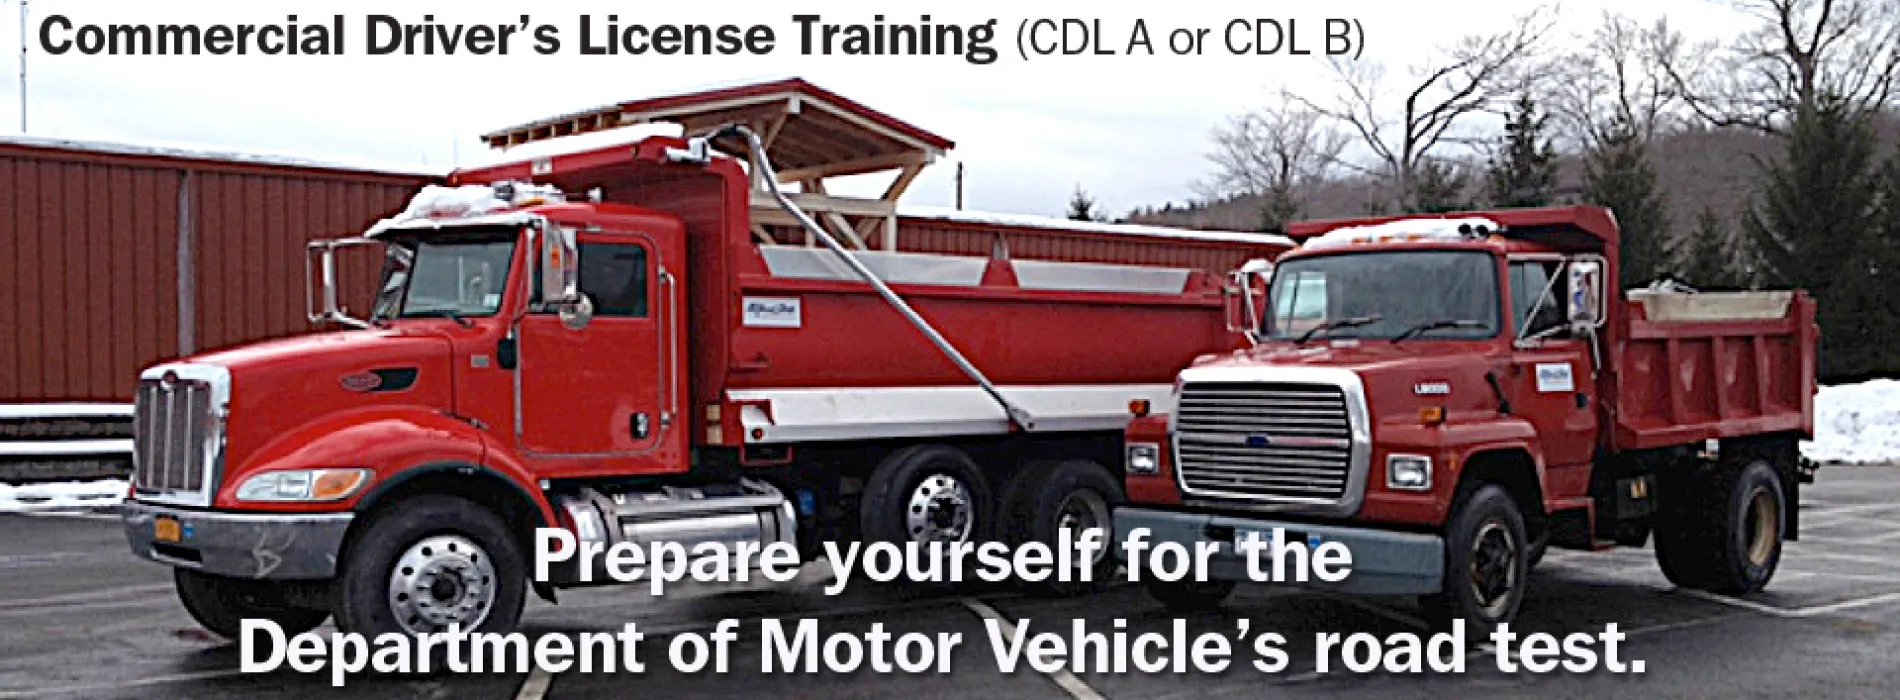 Commercial Driver's License Training. Prepare yourself for the DMV road test.